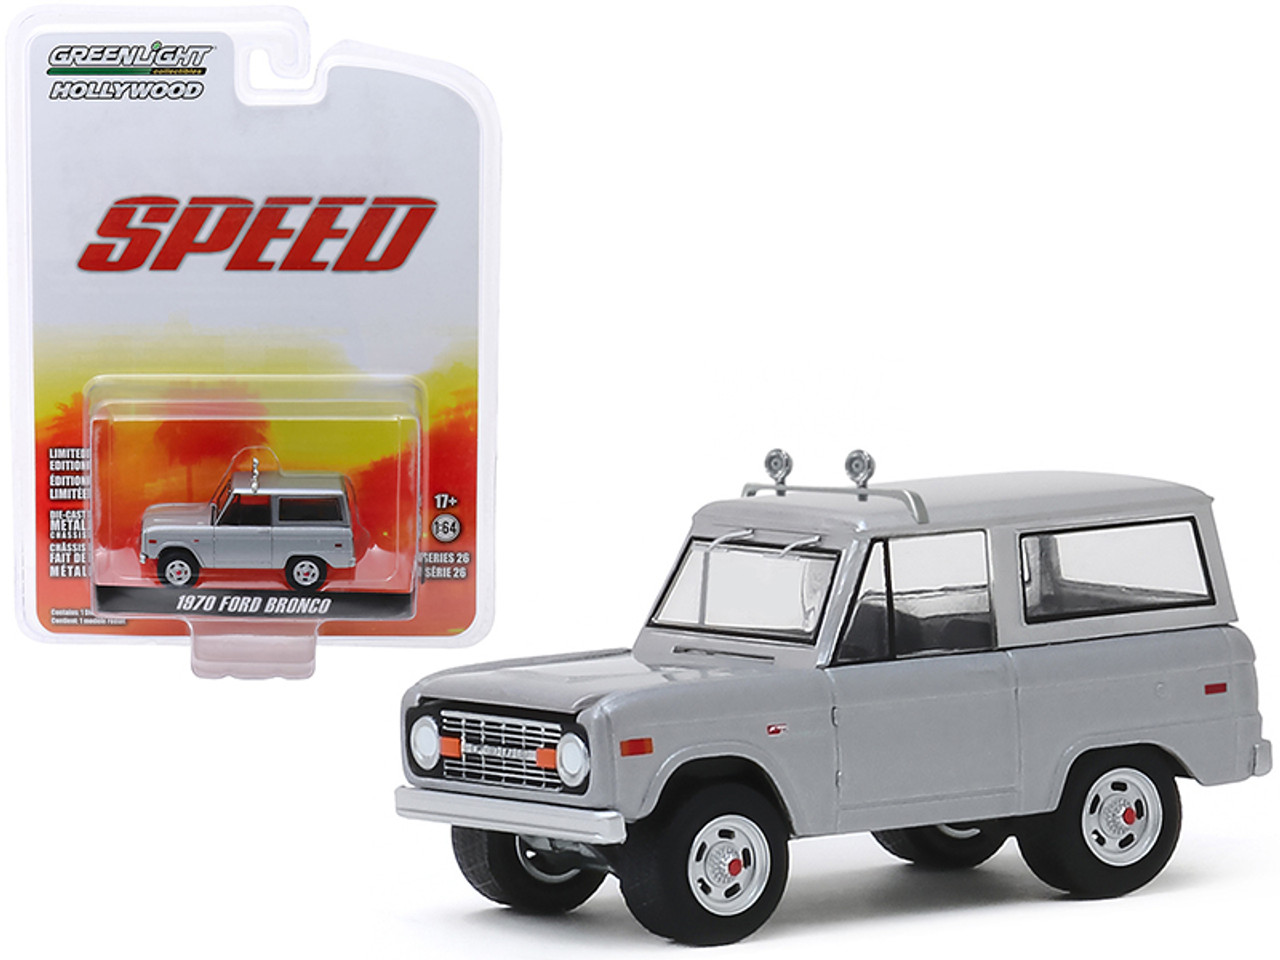 1970 Ford Bronco Gray (Jack Traven's) "Speed" (1994) Movie "Hollywood Series" Release 26 1/64 Diecast Model Car by Greenlight